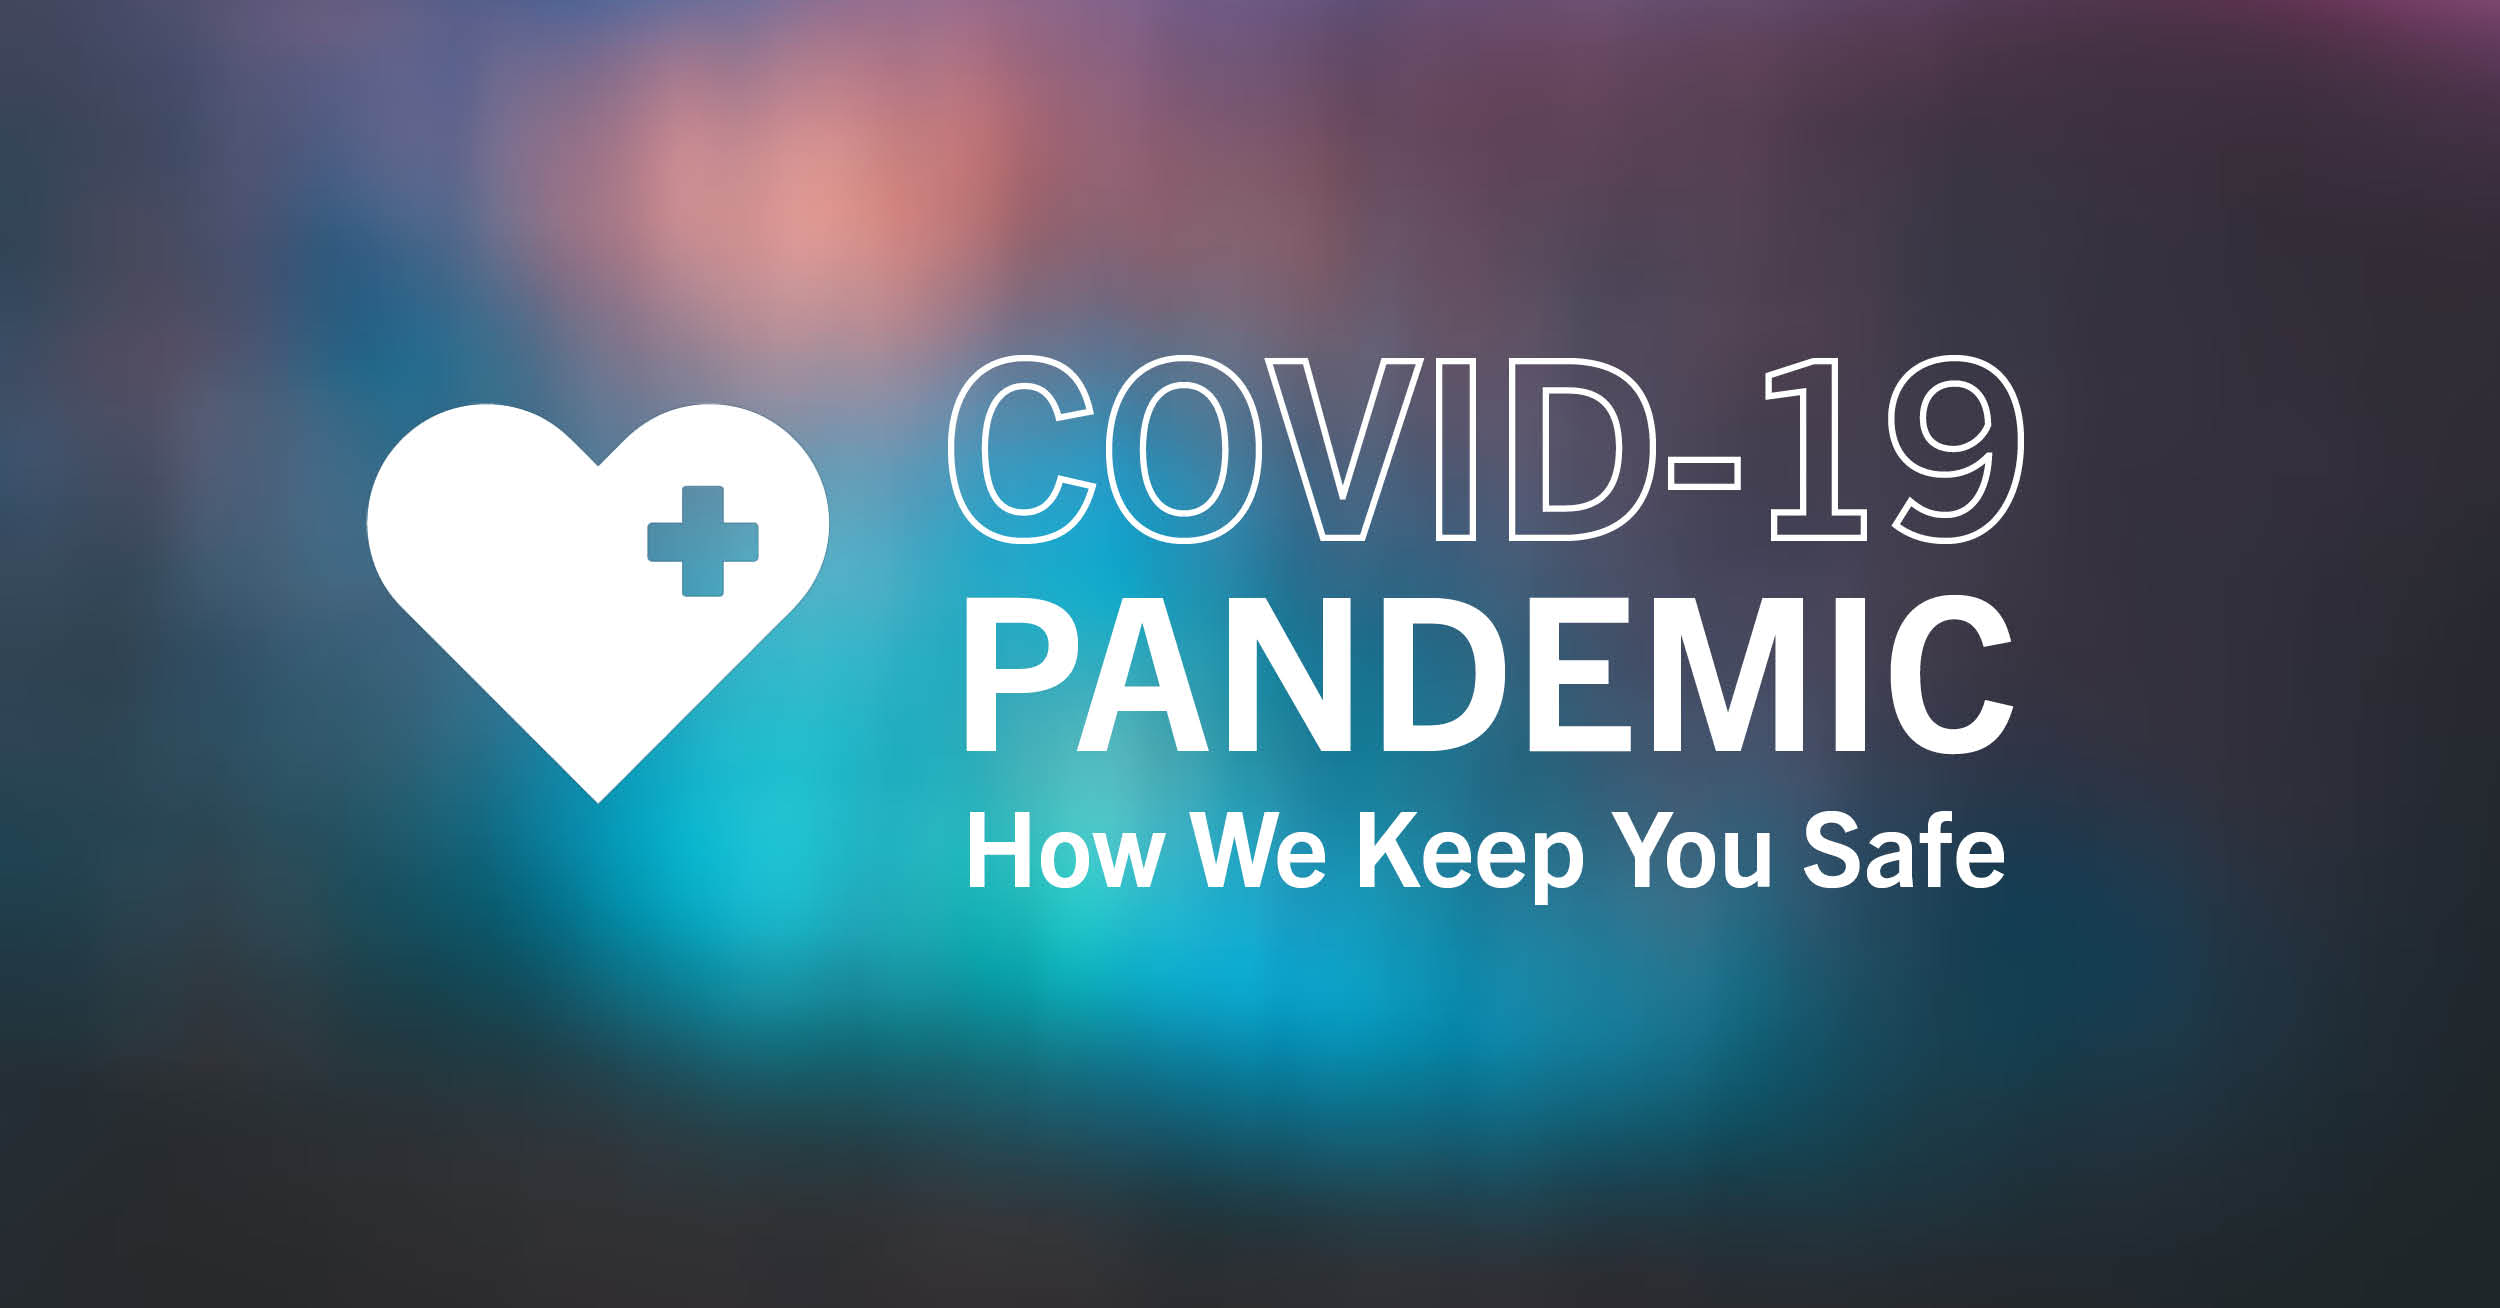 COVID-19 pandemic safety